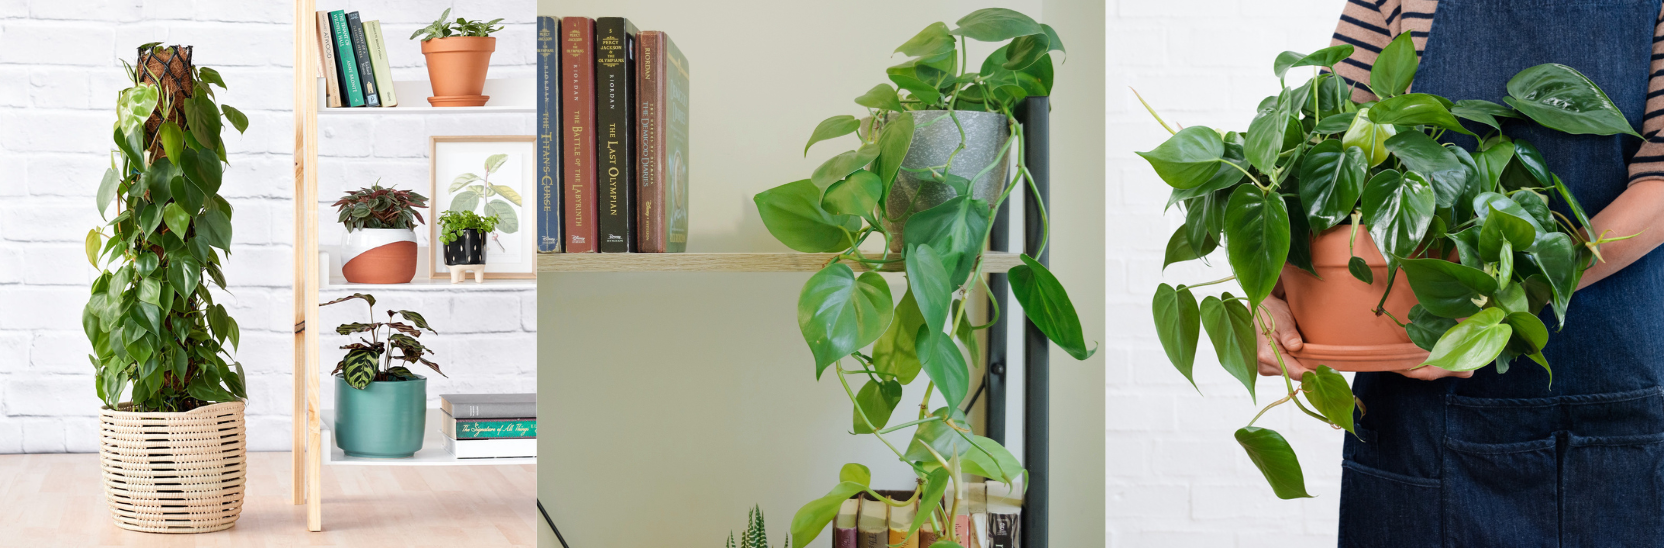 20 Fast Growing Indoor Plants - Heartleaf Philodendron